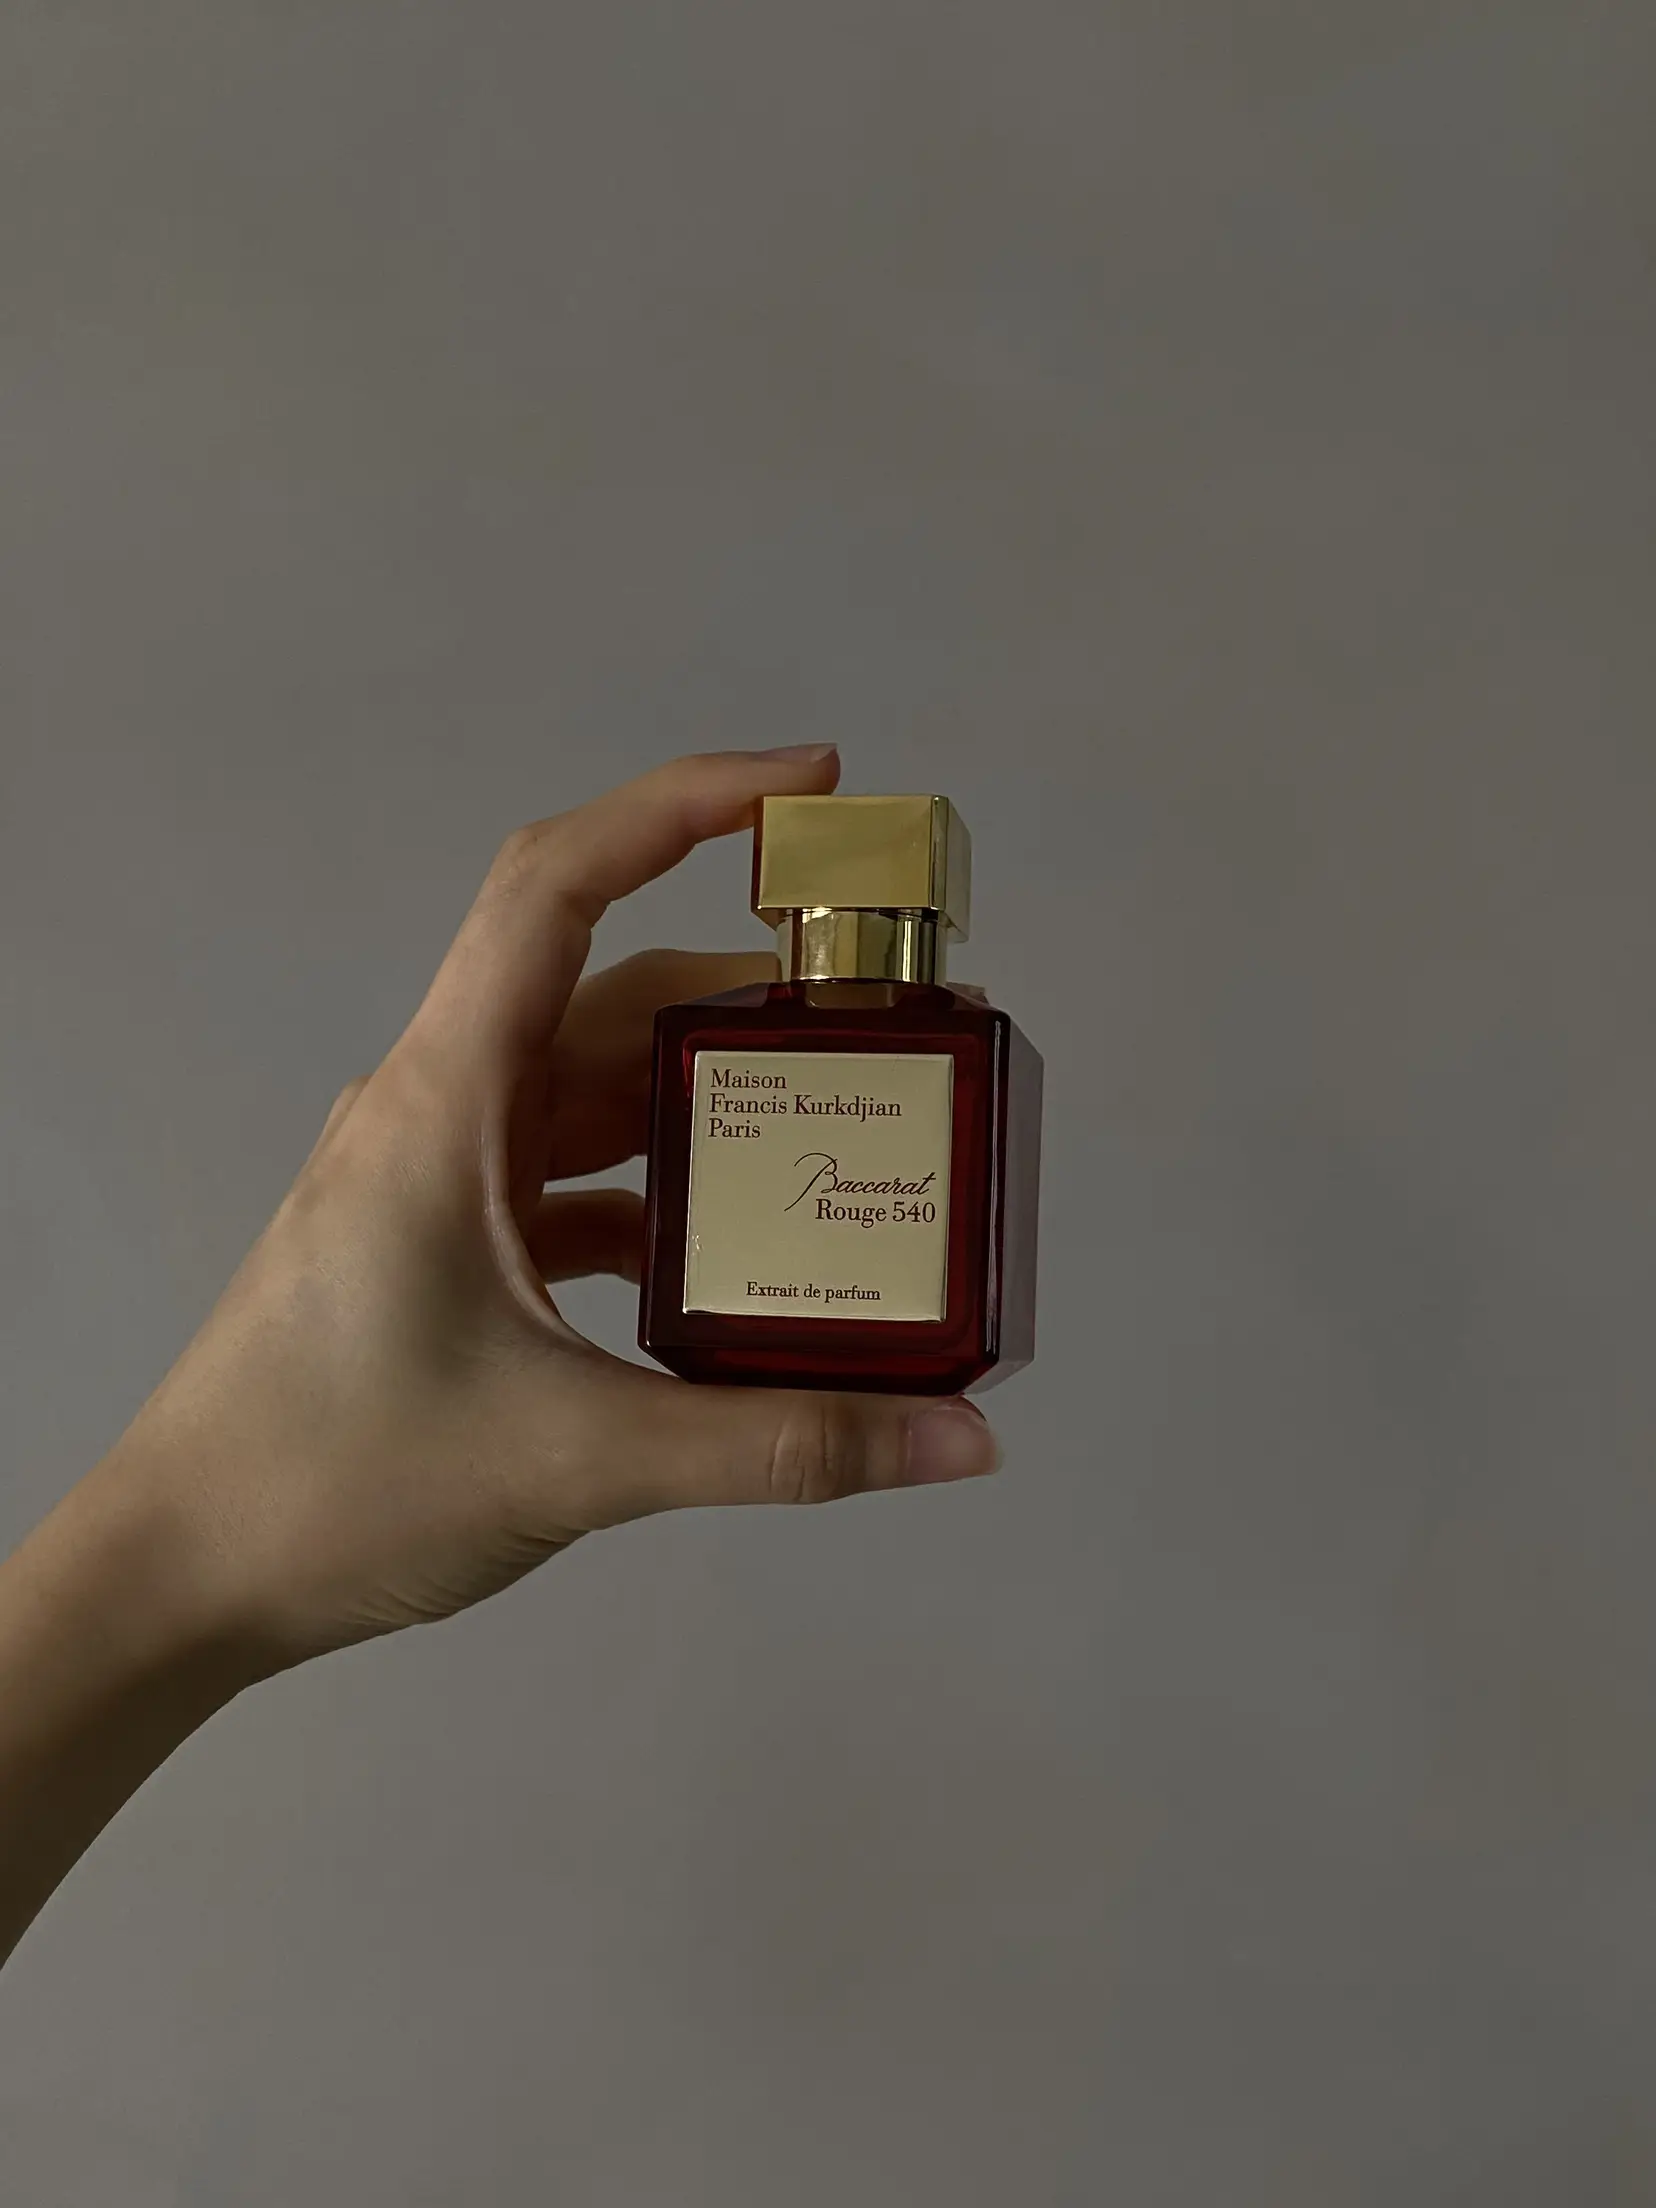 Why is Baccarat Rouge 540 the world's most cult perfume?